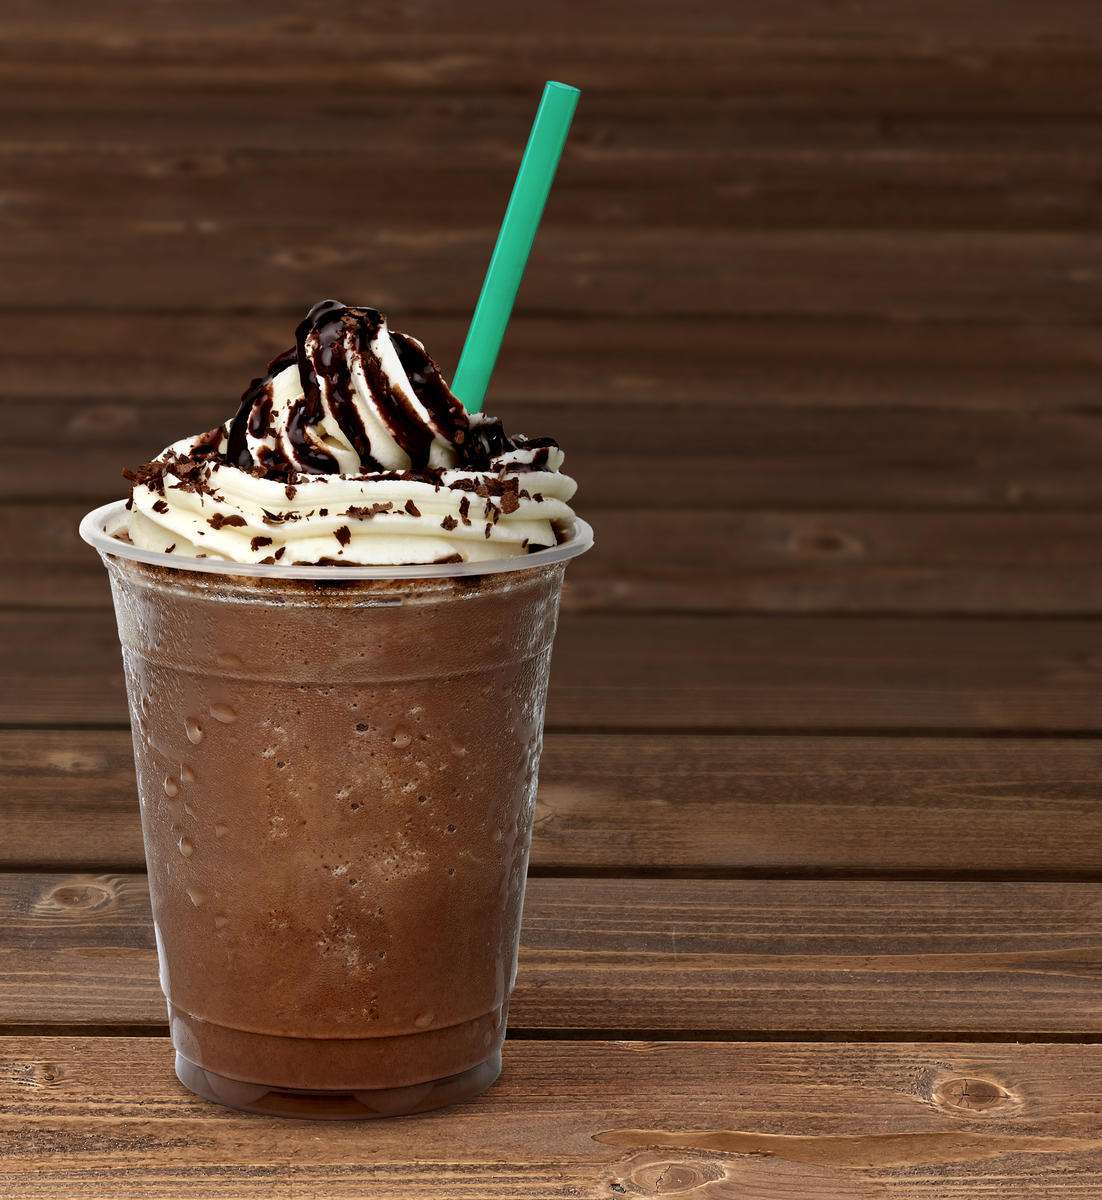 Frappuccino Drink with Green Straw